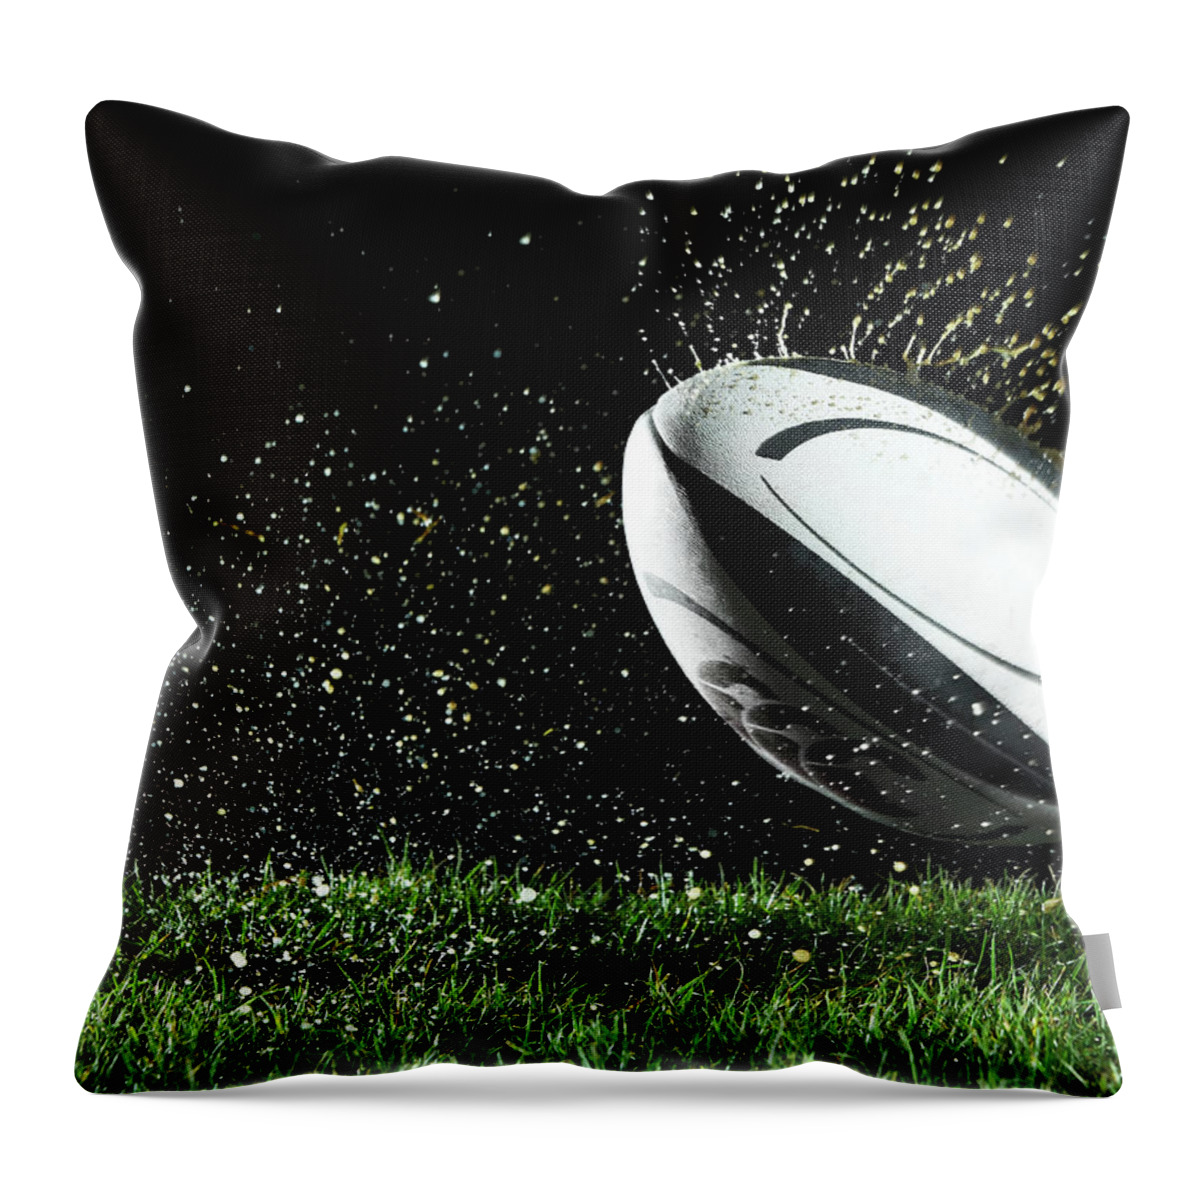 Grass Throw Pillow featuring the photograph Rugby Ball In Motion Over Grass by Thomas Northcut